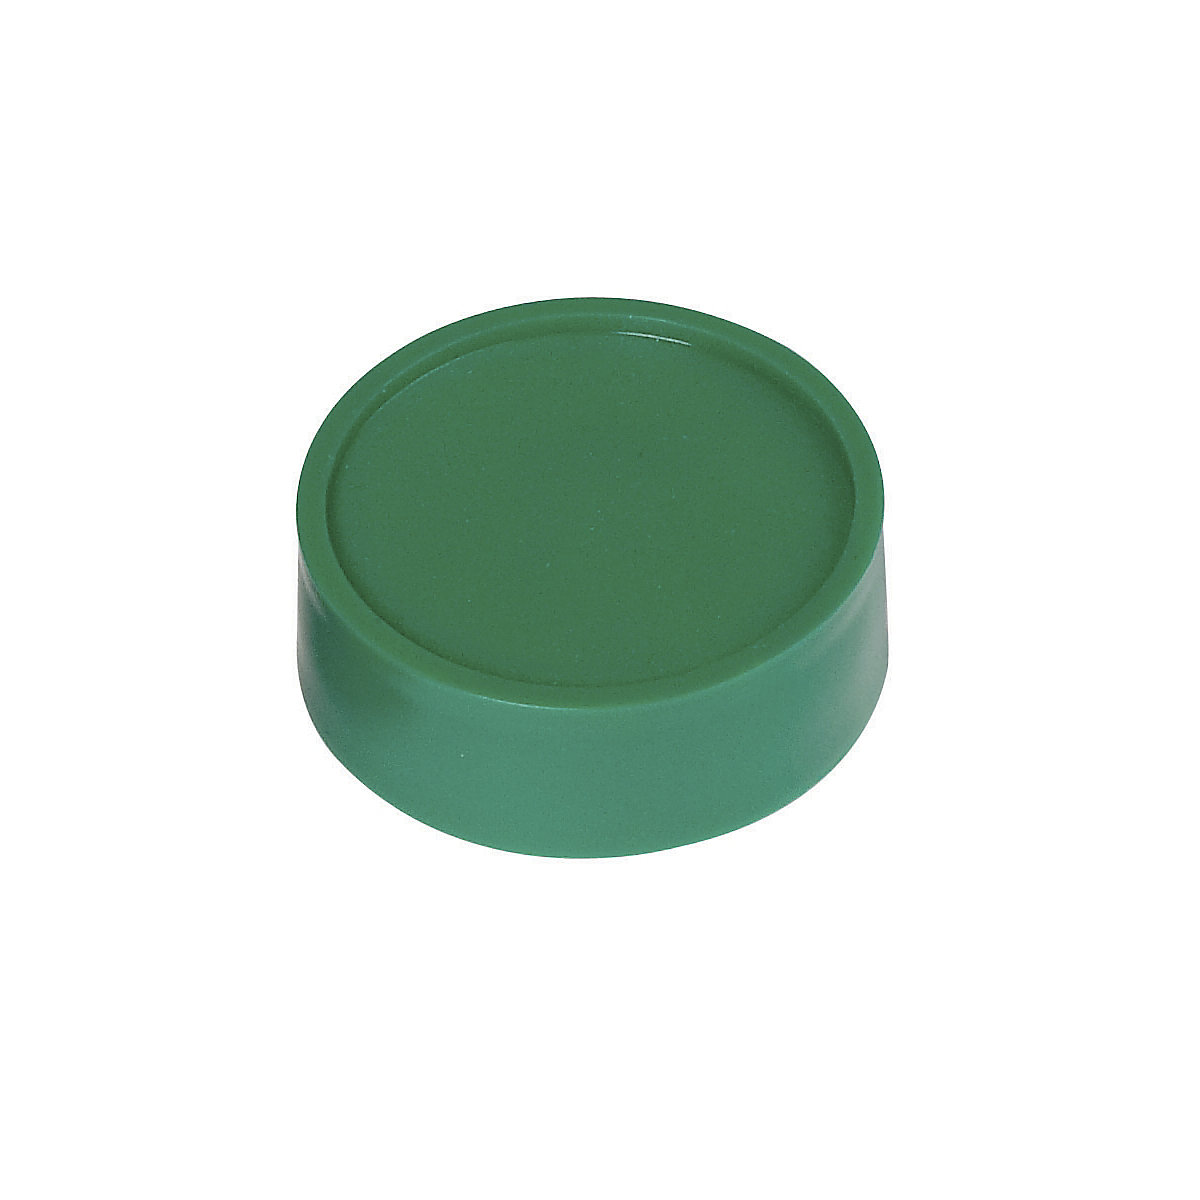 Round magnets – MAUL, Ø 34 mm, pack of 50, green-3